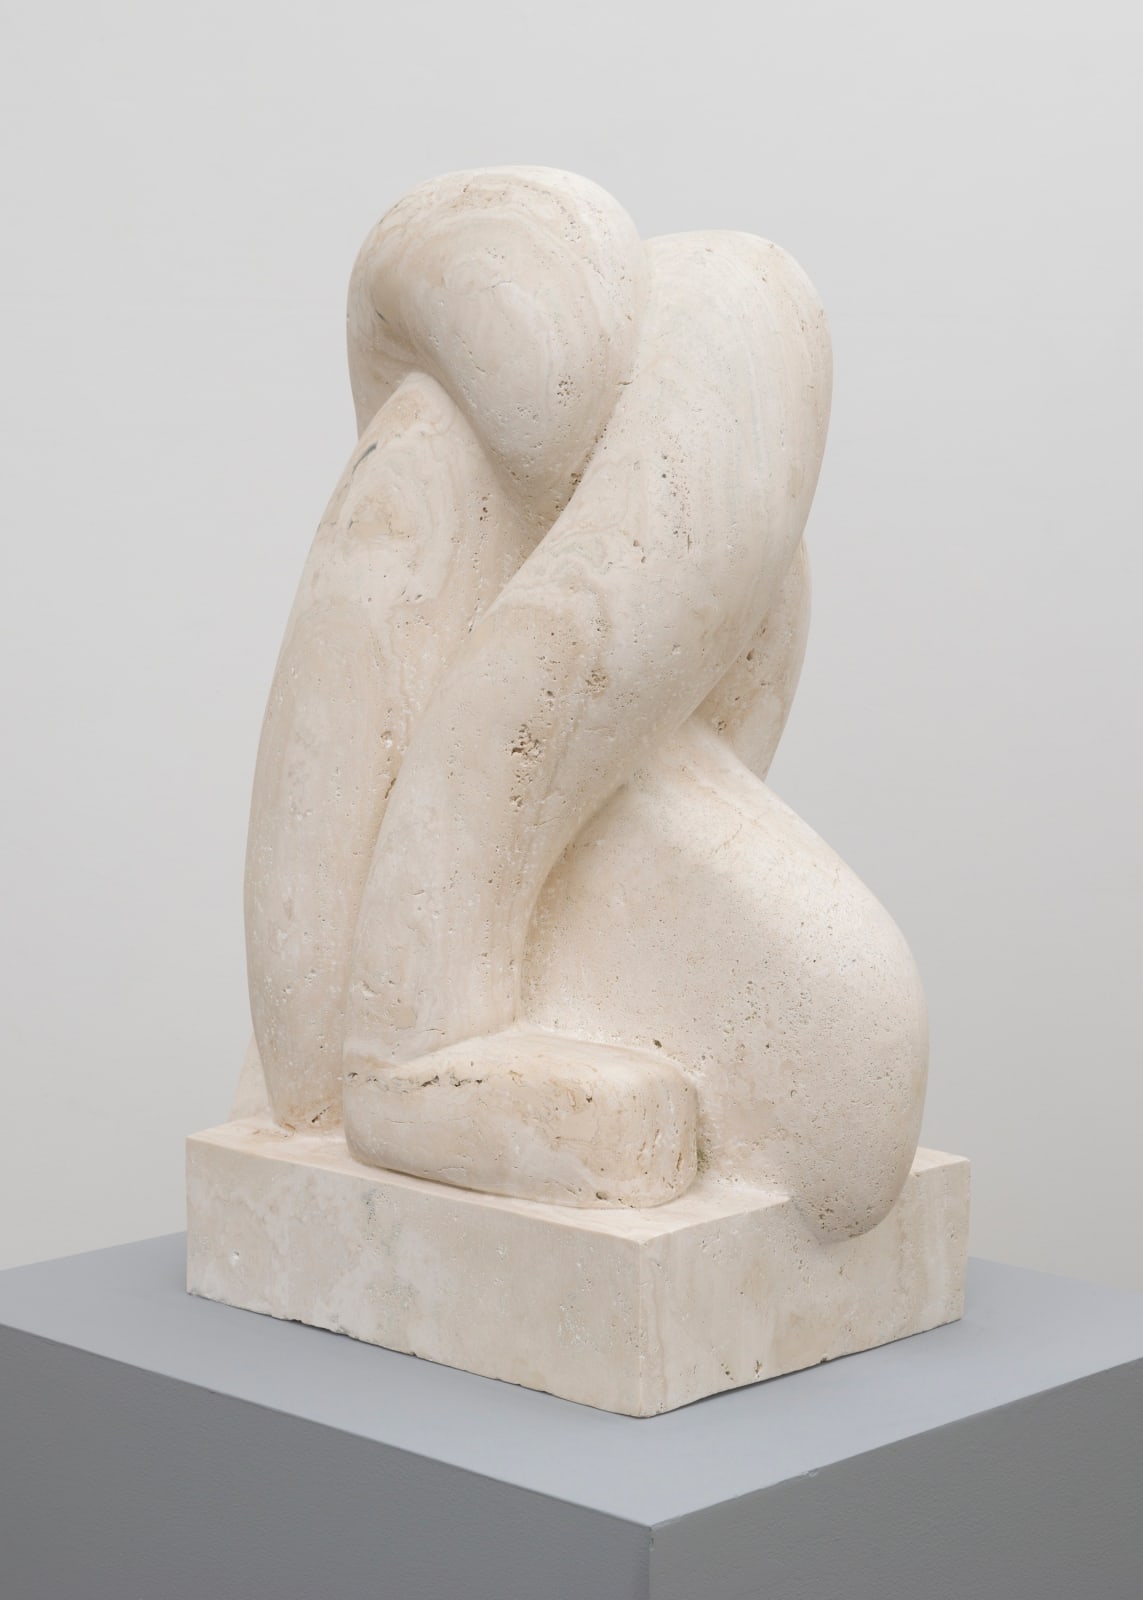 Free-standing marble sculpture of three bodily forms resembling limbs intertwining with each other making a braided shape on a marble square pedestal